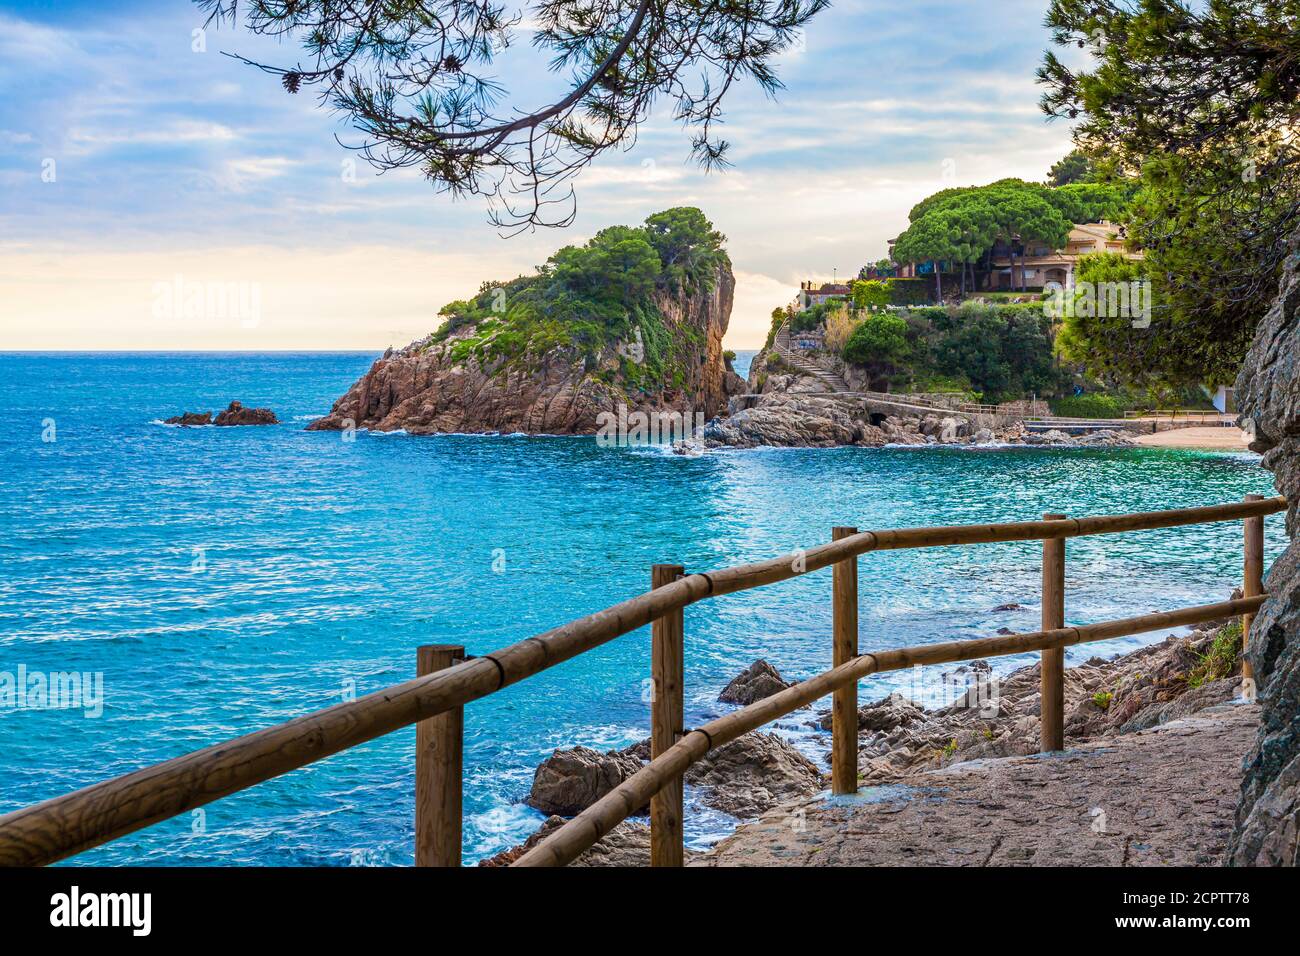 Costa Brava bay and beach with turquoise waters. Stock Photo